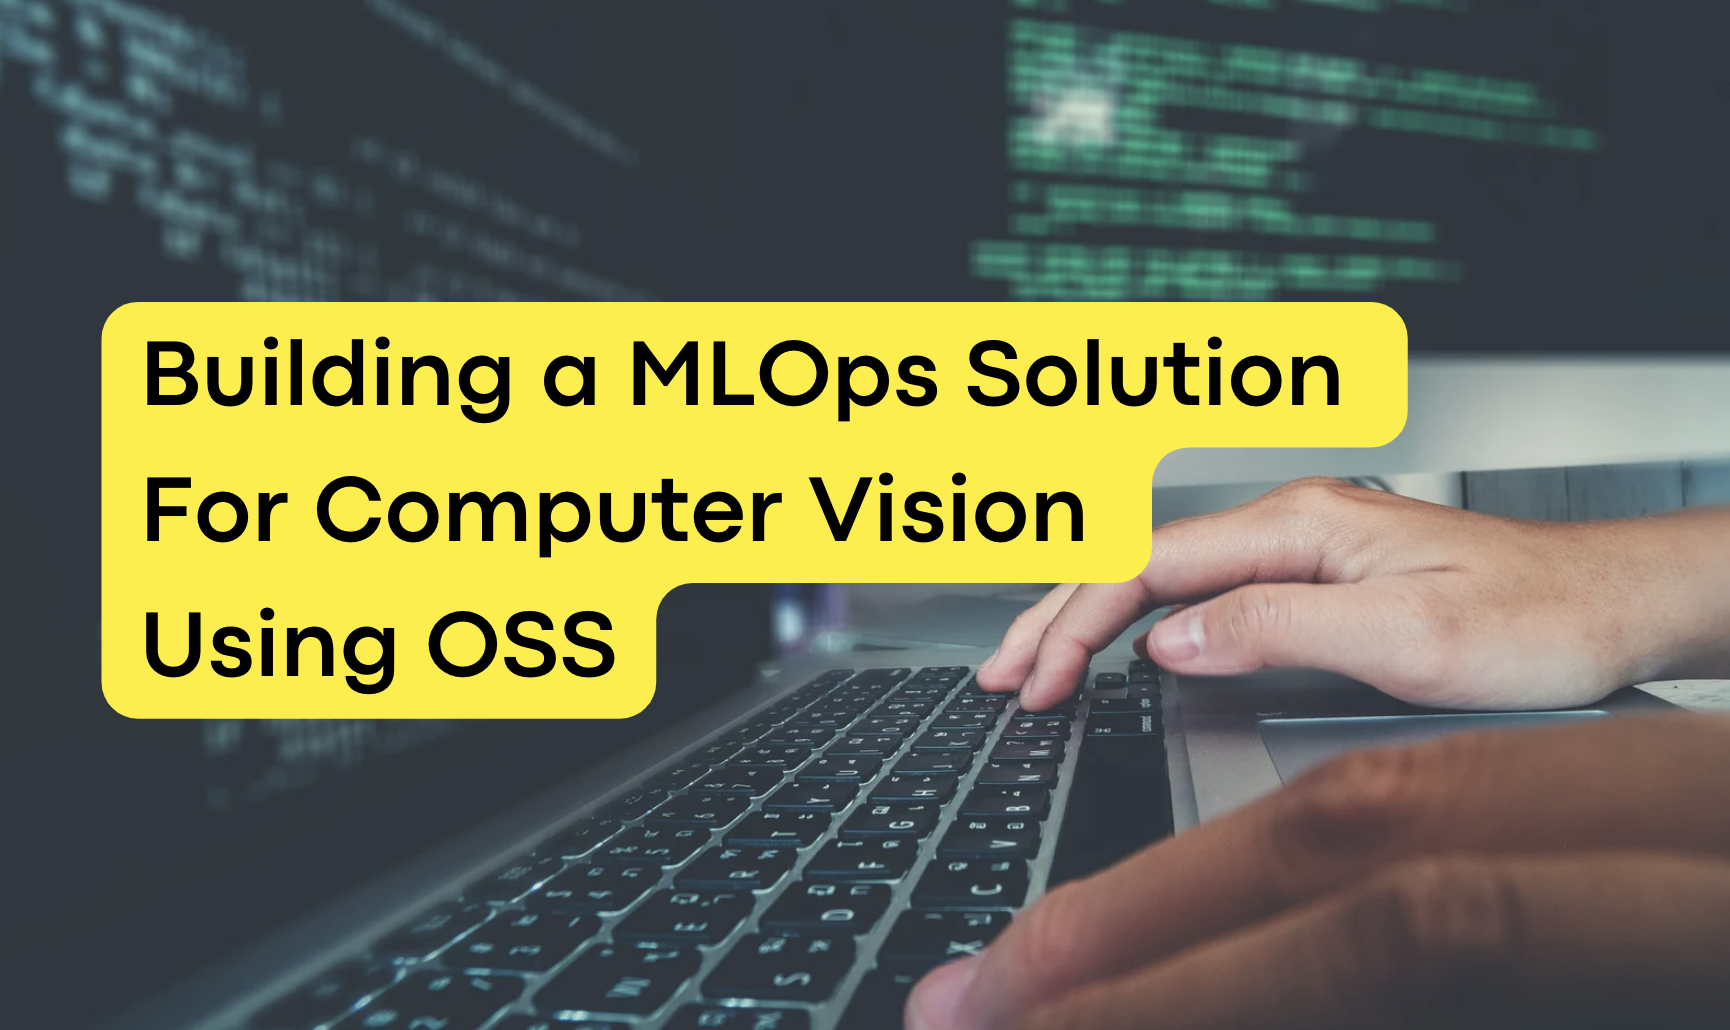 How to Build a Full MLOps Solution For Computer Vision Using OSS